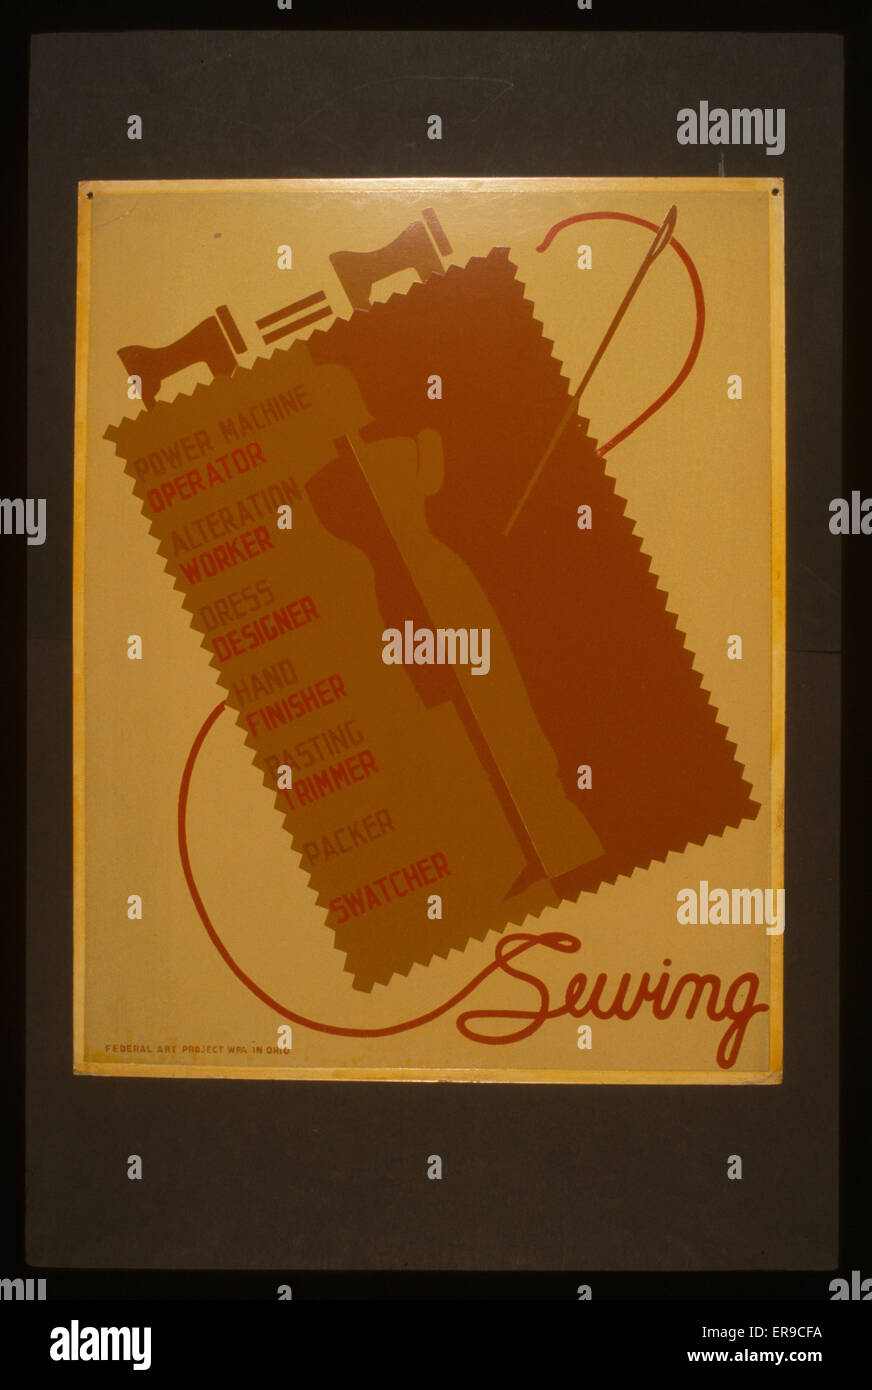 Sewing. Poster promoting occupations related to sewing, such as power machine operator, alteration worker, dress designer, hand finisher, basting trimmer, packer, swatcher, showing a swatch of cloth with needle and thread. Date 1937. Stock Photo